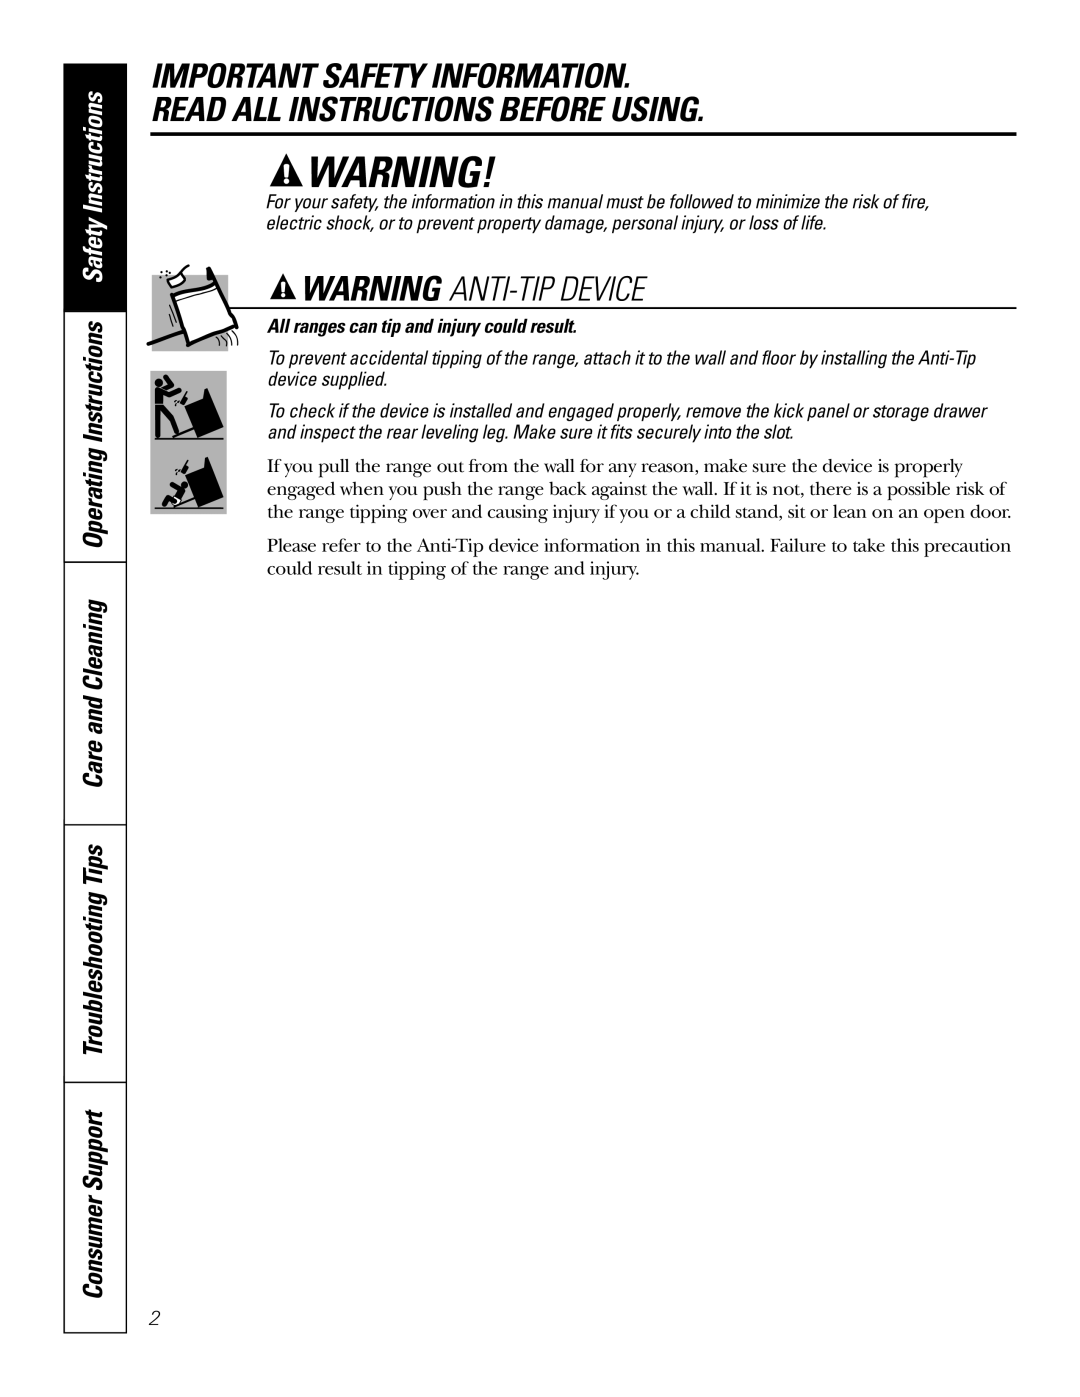 GE JBP82 owner manual Important Safety Information, Read All Instructions Before Using, Warning Anti-Tipdevice 